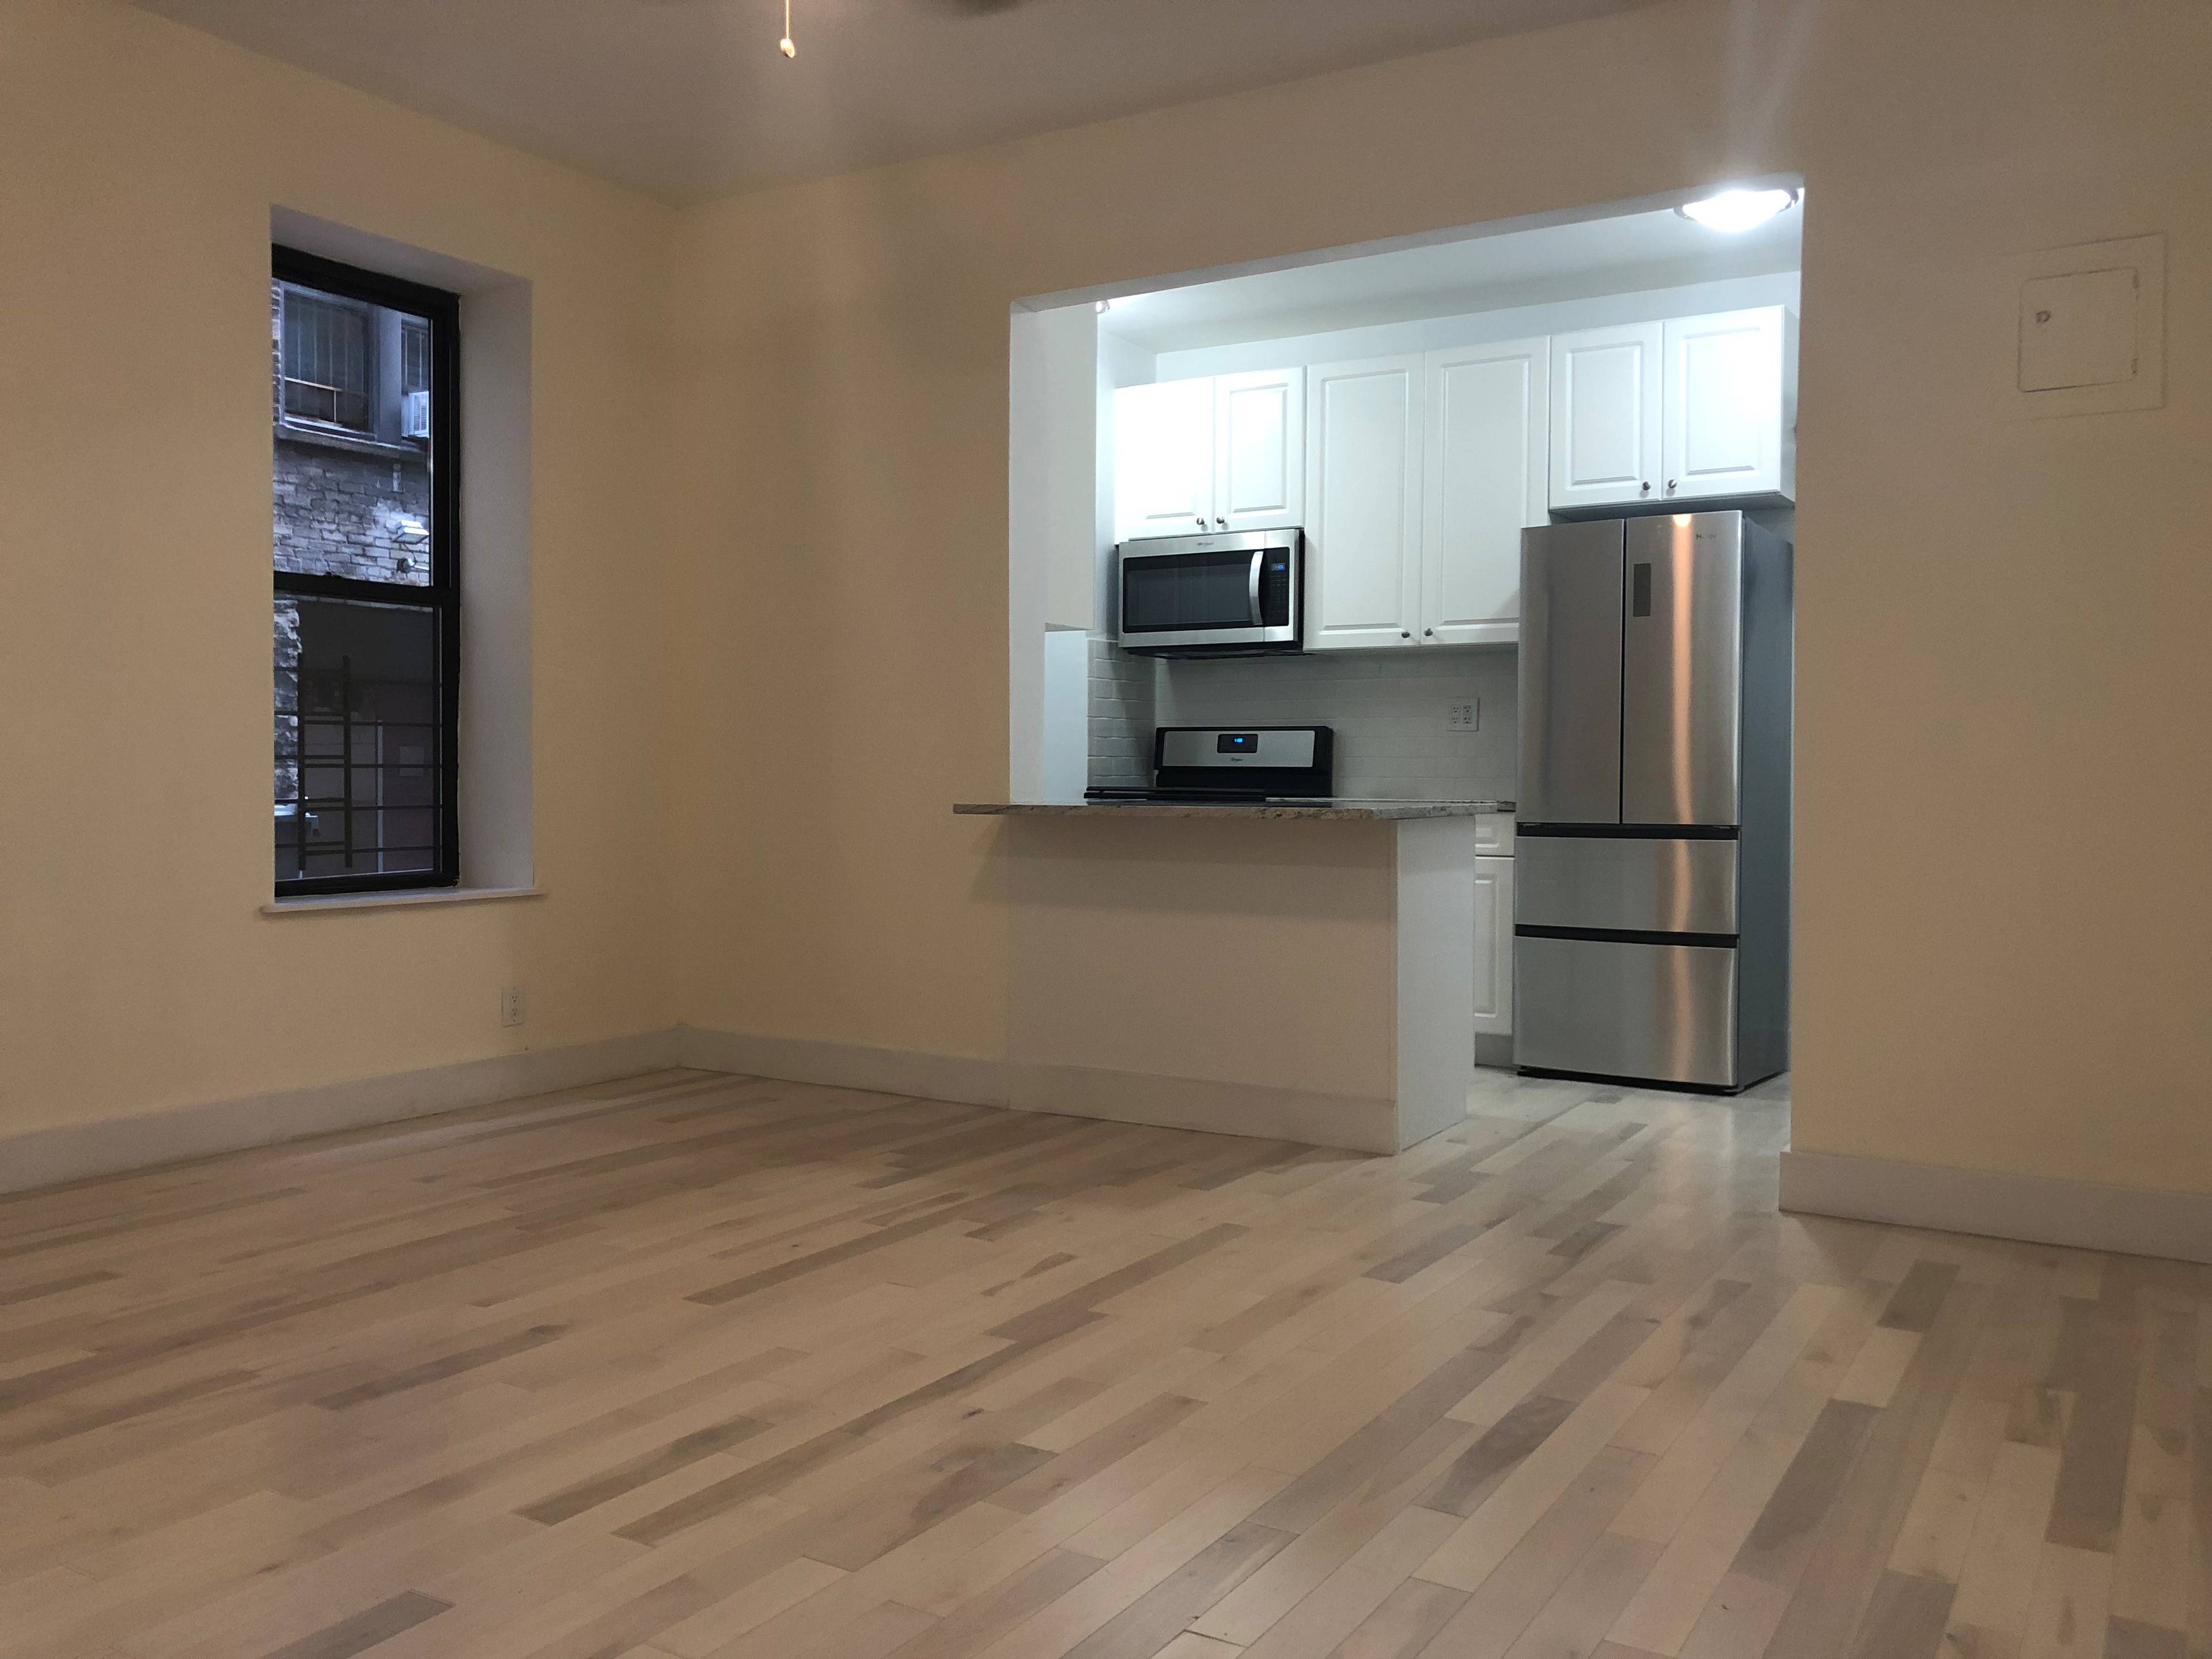 Brand New Gut Renovated Spacious Studio Apartment With Amazing Modern Finishes In Hudson Heights!